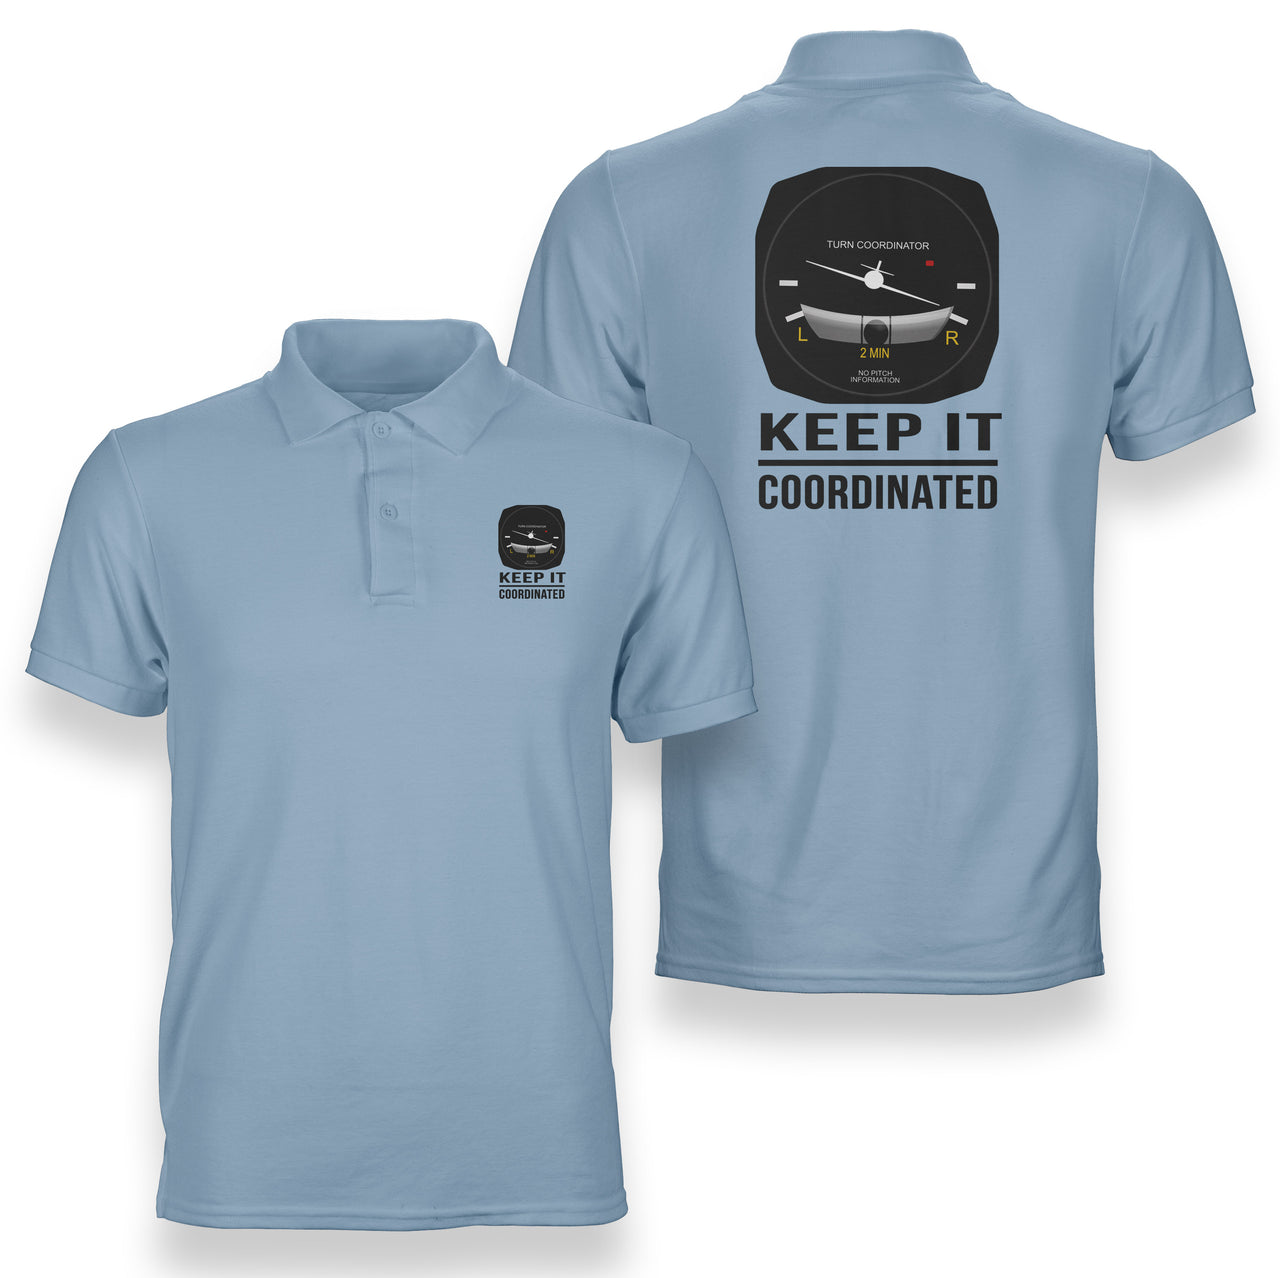 Keep It Coordinated Designed Double Side Polo T-Shirts